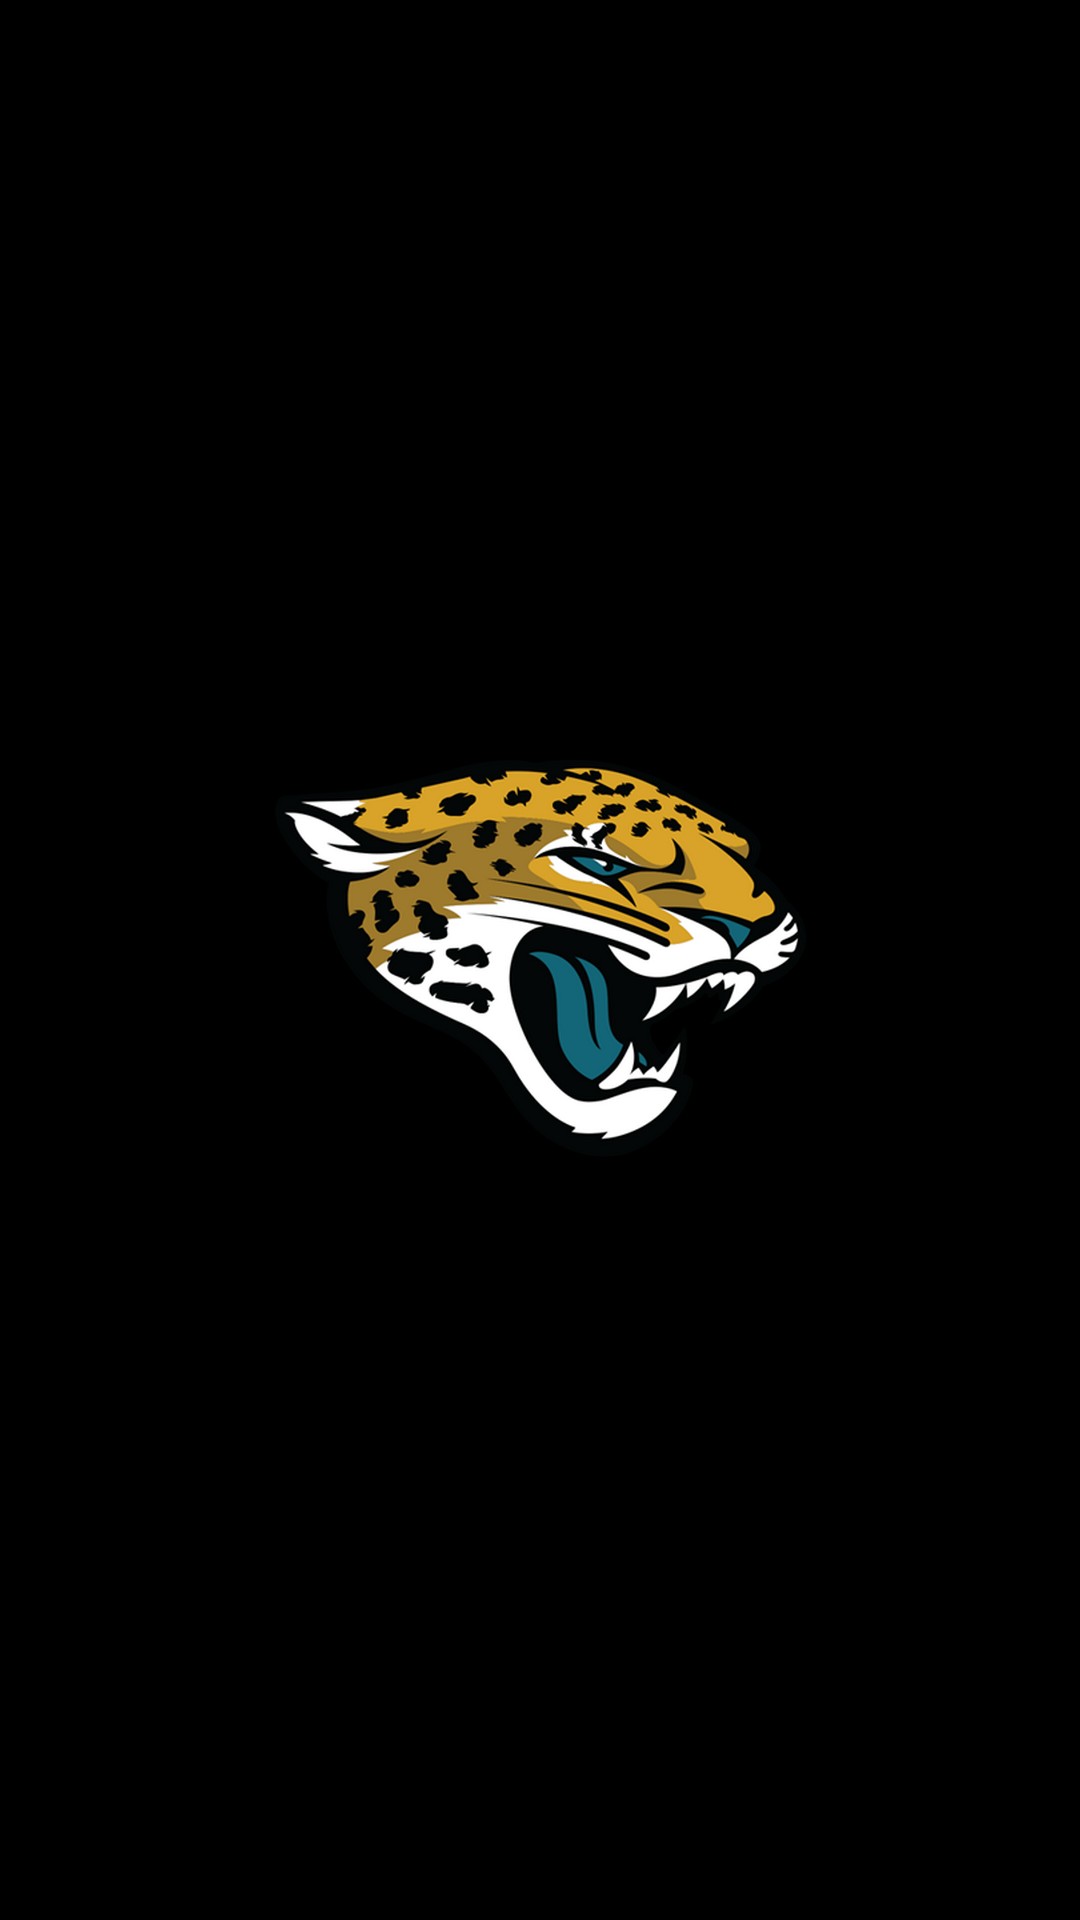 Wallpapers iPhone Jacksonville Jaguars with high-resolution 1080x1920 pixel. Donwload and set as wallpaper for your iPhone X, iPhone XS home screen backgrounds, XS Max, XR, iPhone8 lock screen wallpaper, iPhone 7, 6, SE and other mobile devices